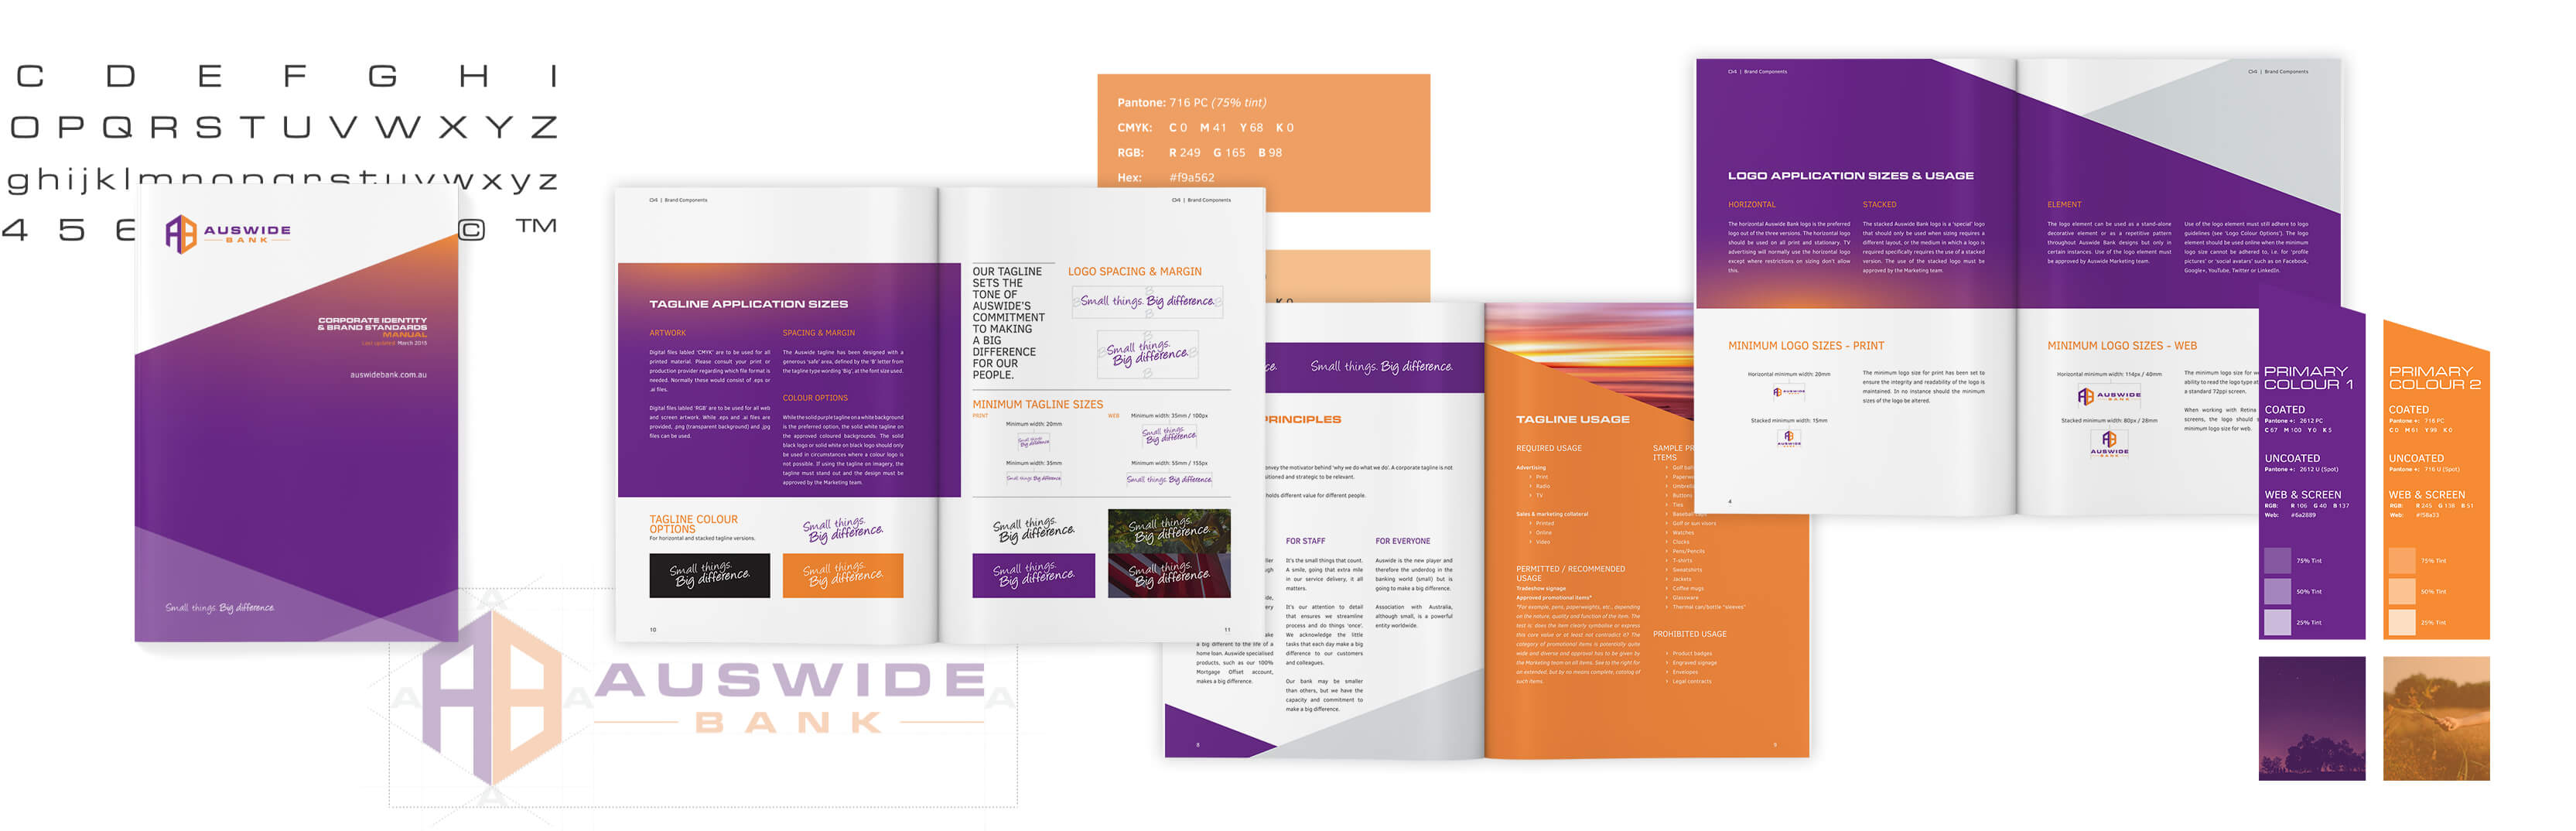 Auswide Bank Brand Guidelines feature